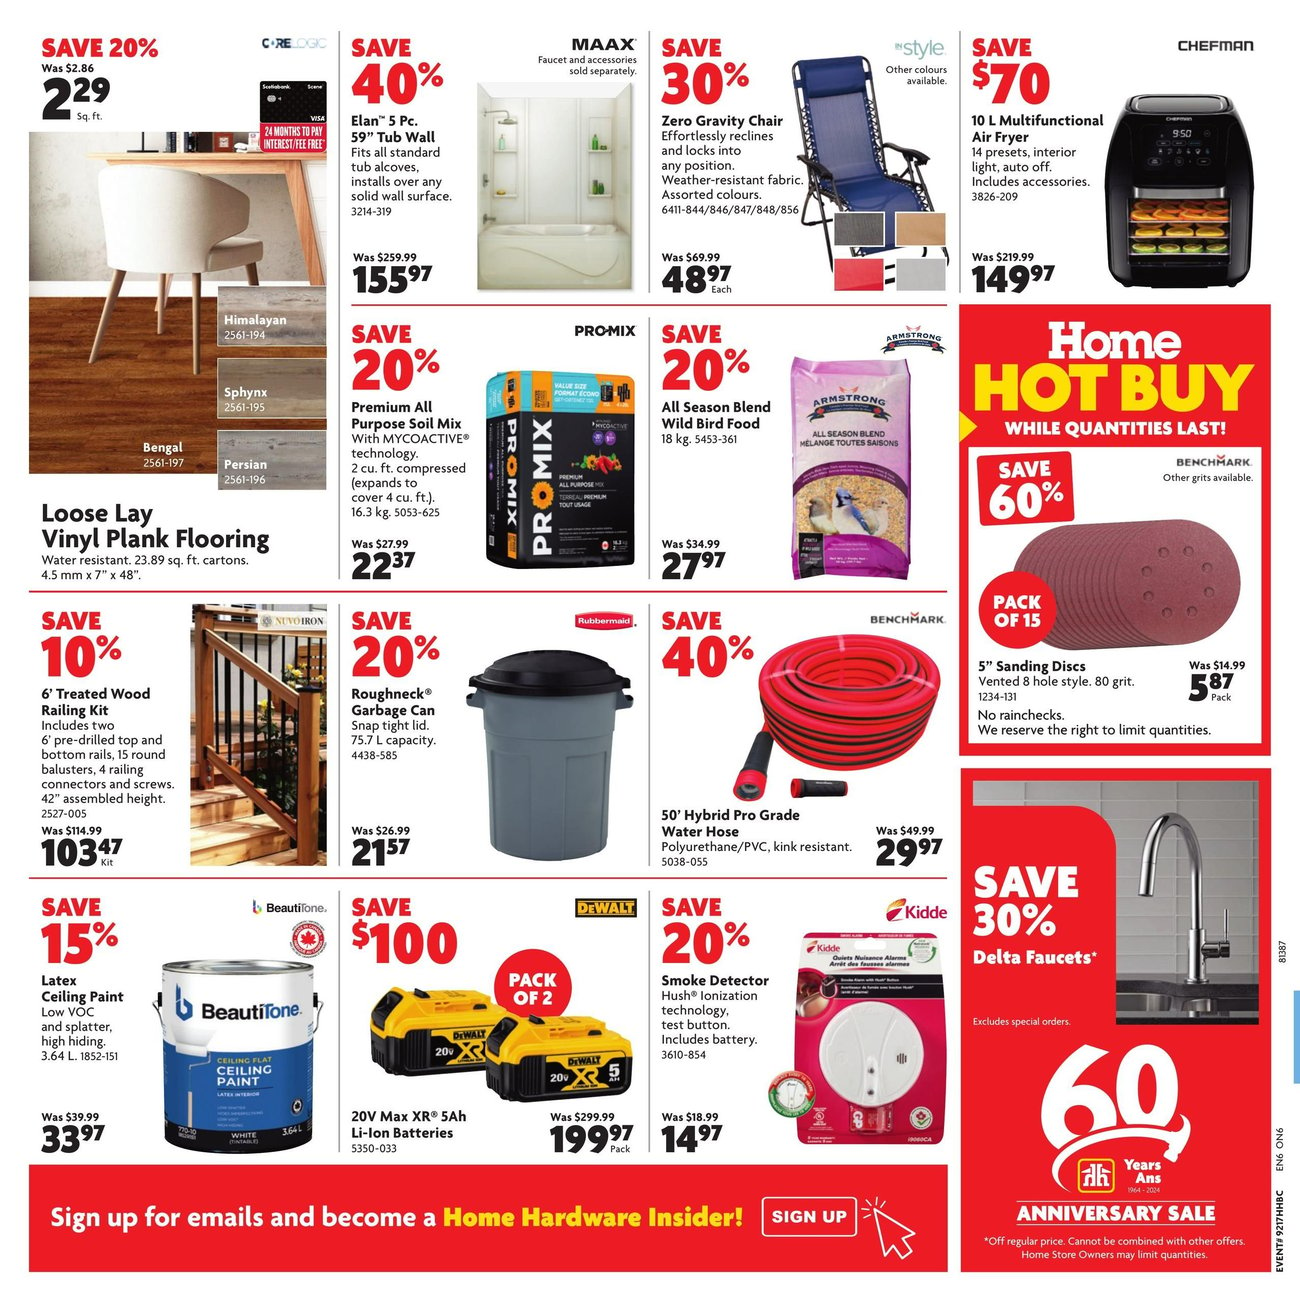 Home Hardware - Building Centre - Page 2